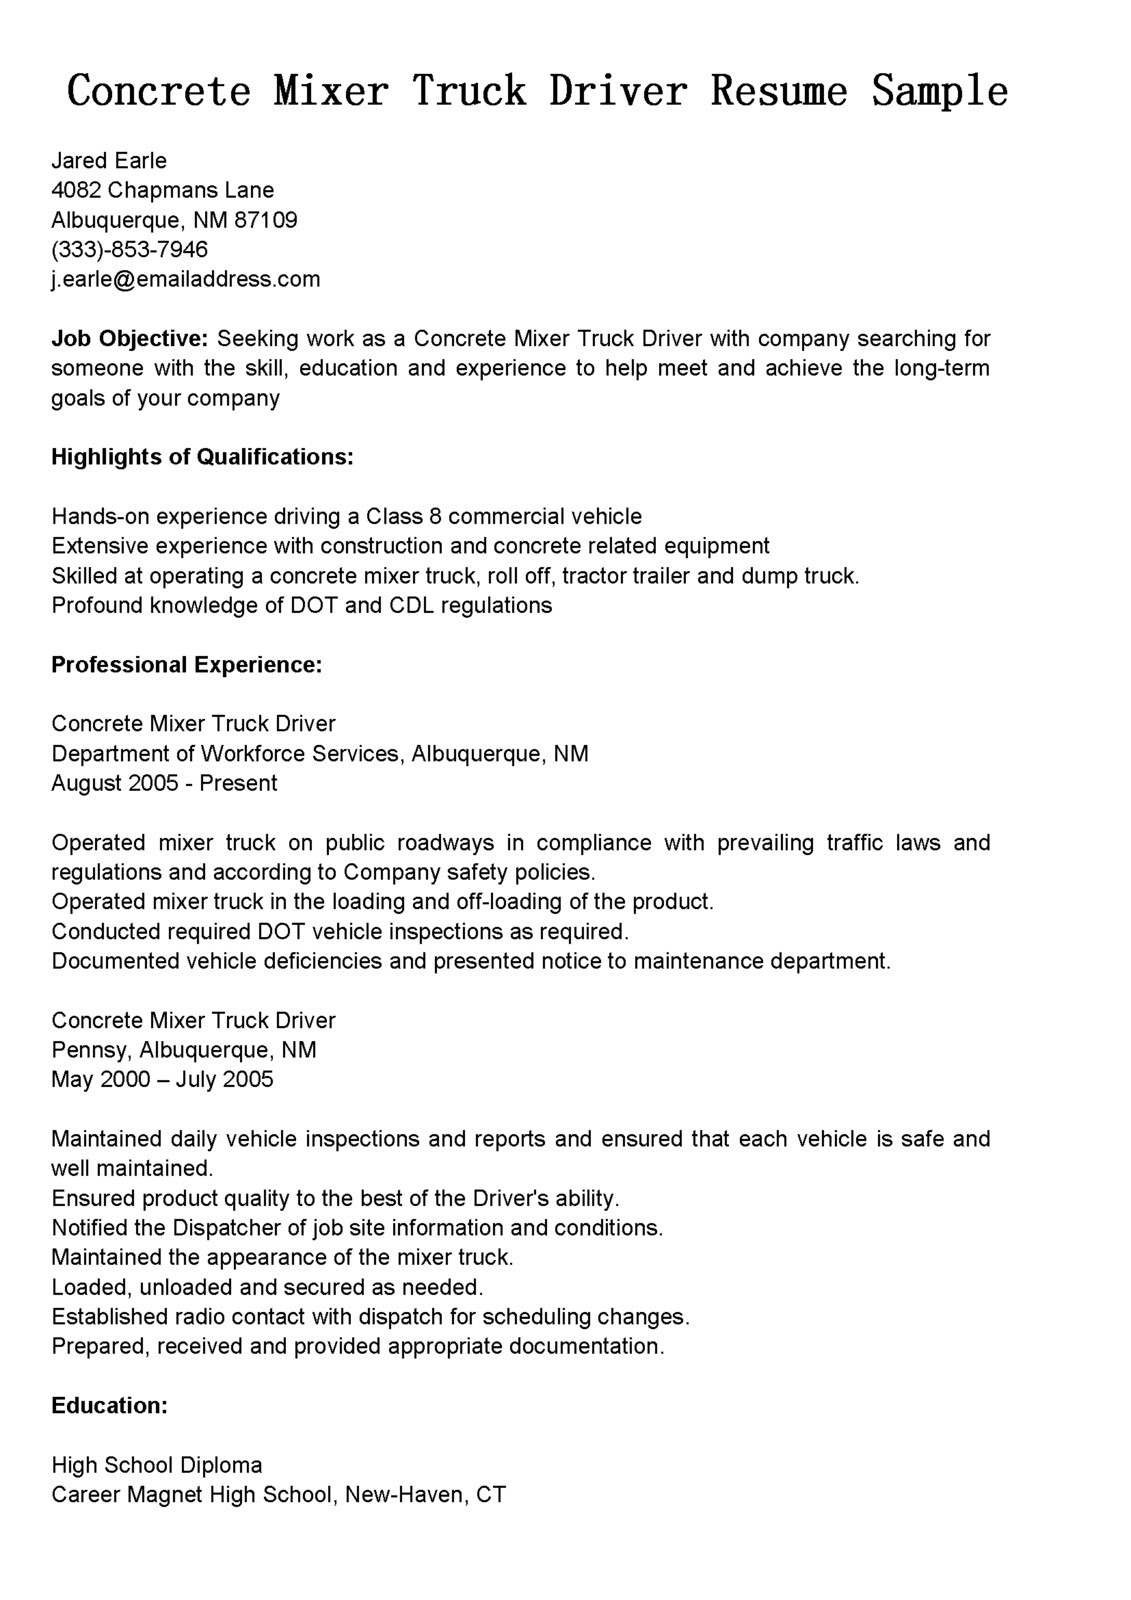 Resume Samples for Truck Drivers with An Objective Driver Resumes: Concrete Mixer Truck Driver Resume Sample